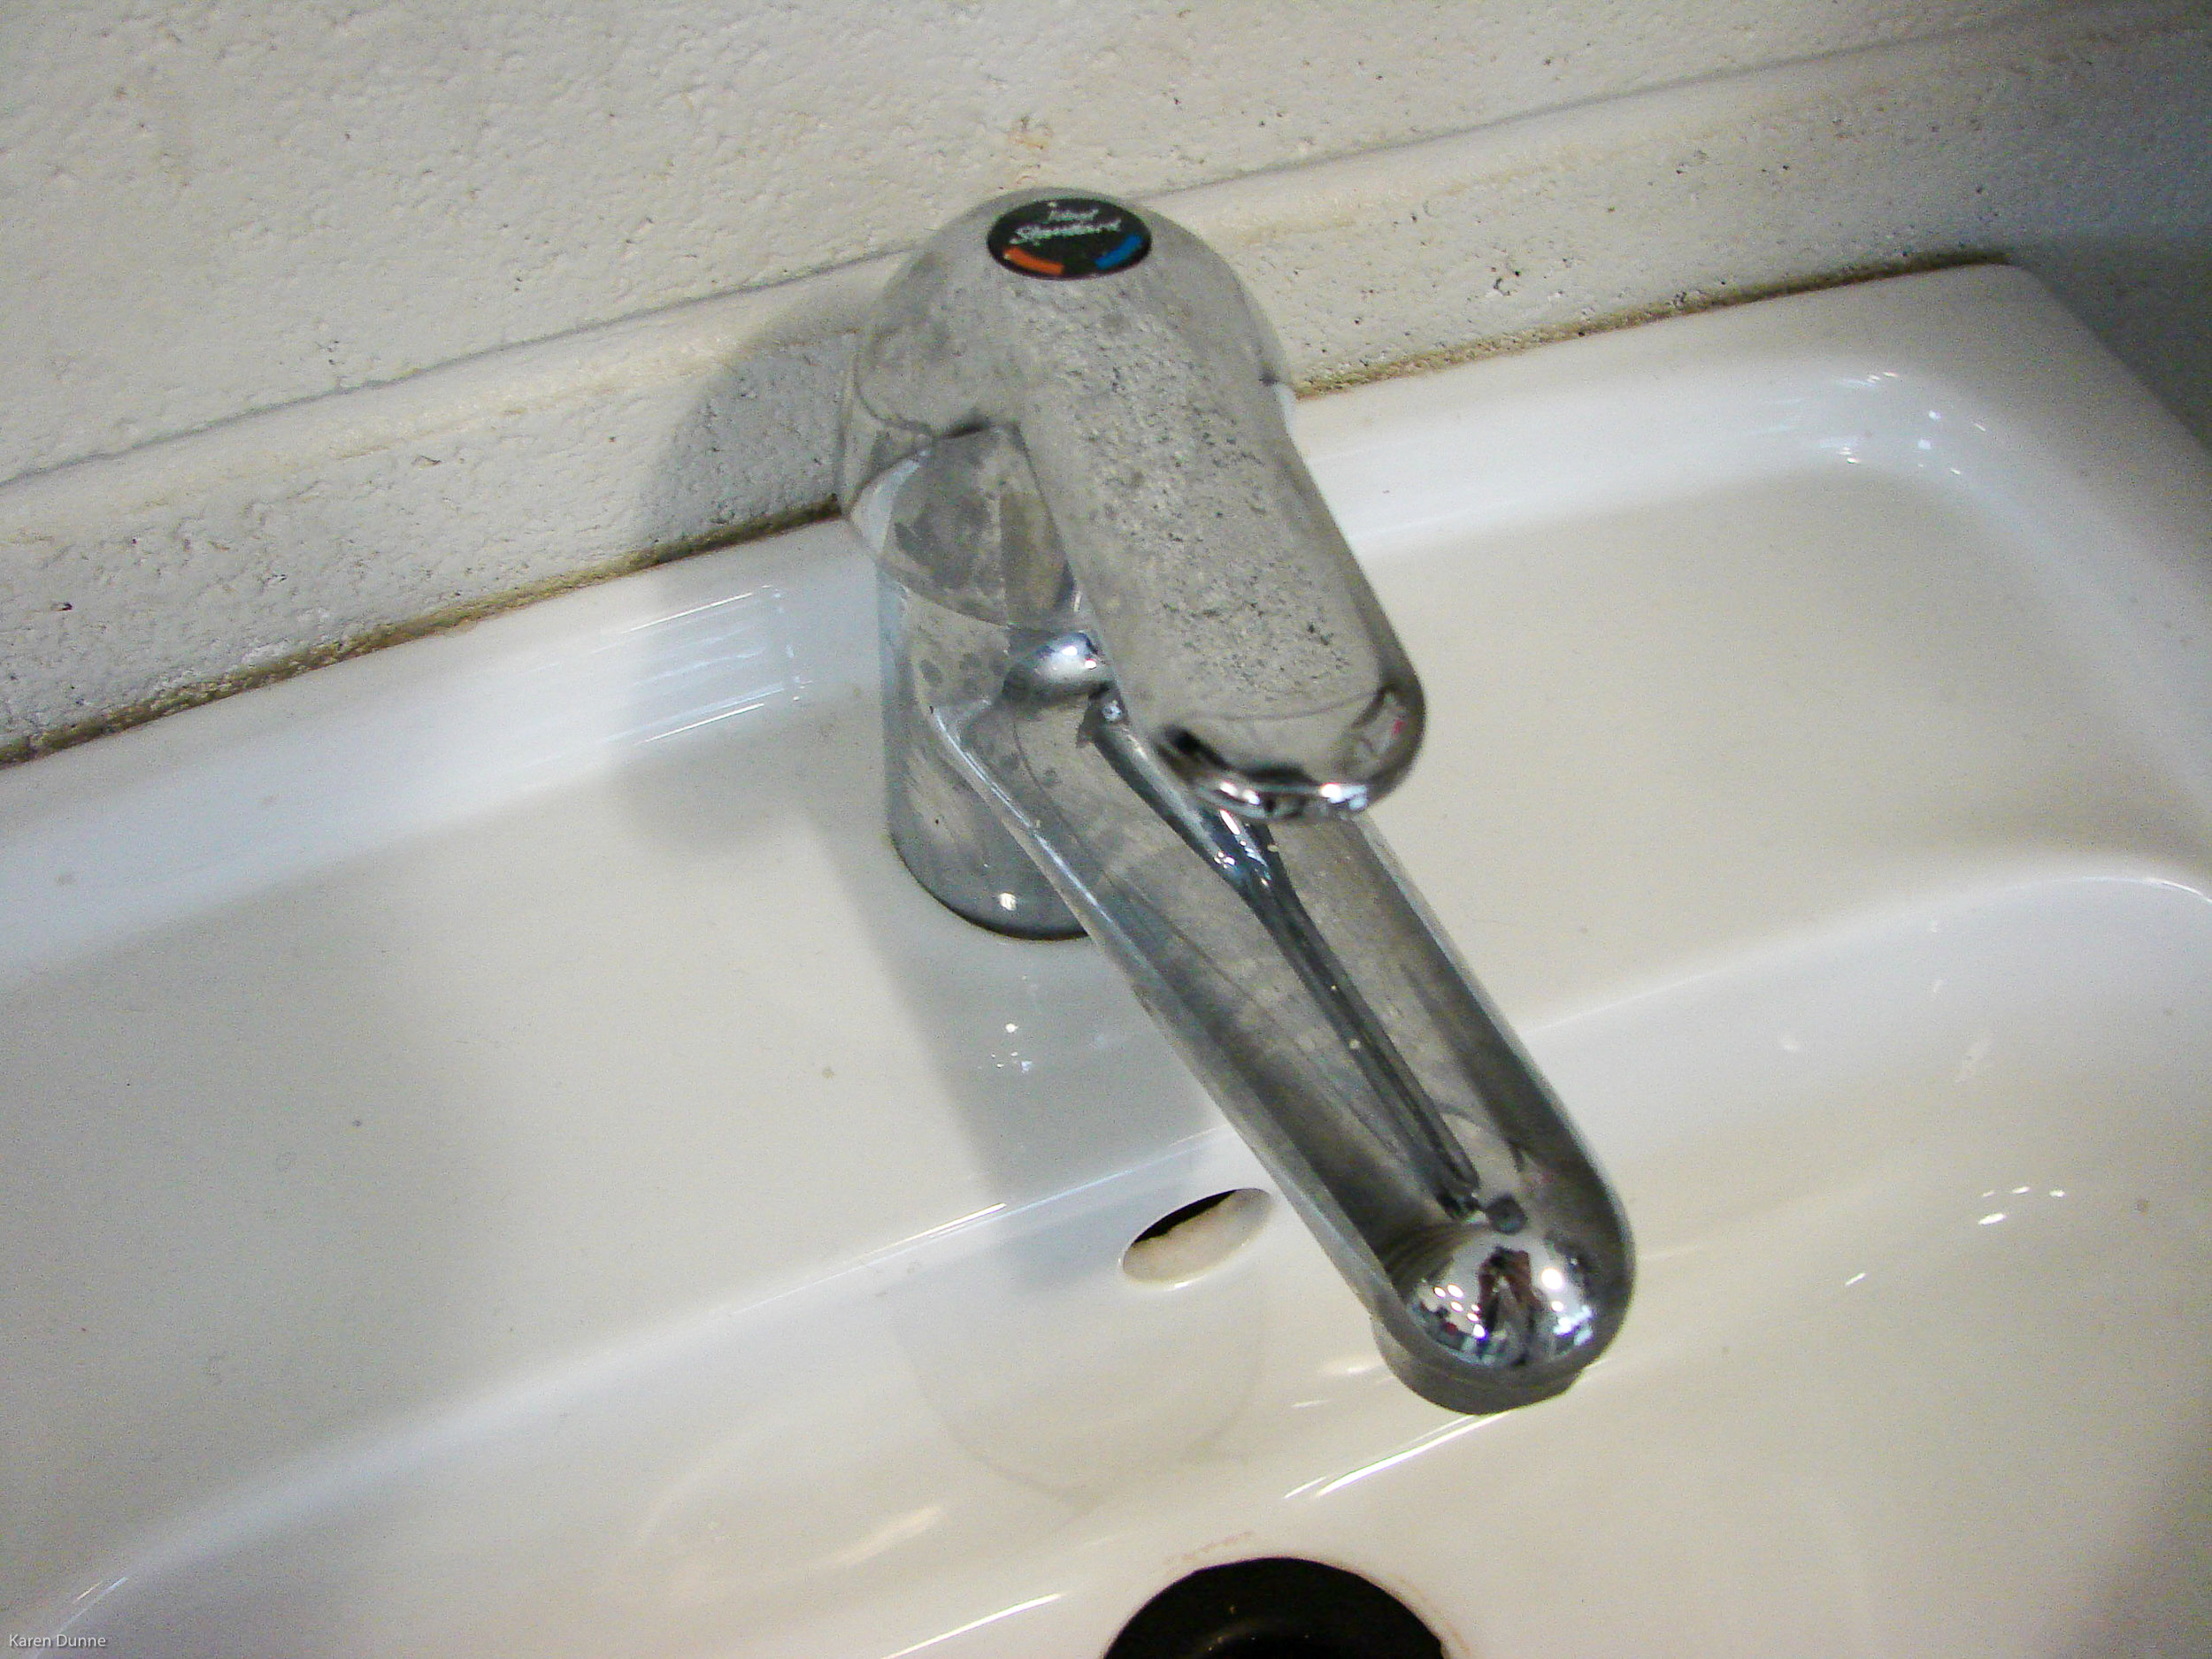 Elbow-operated tap